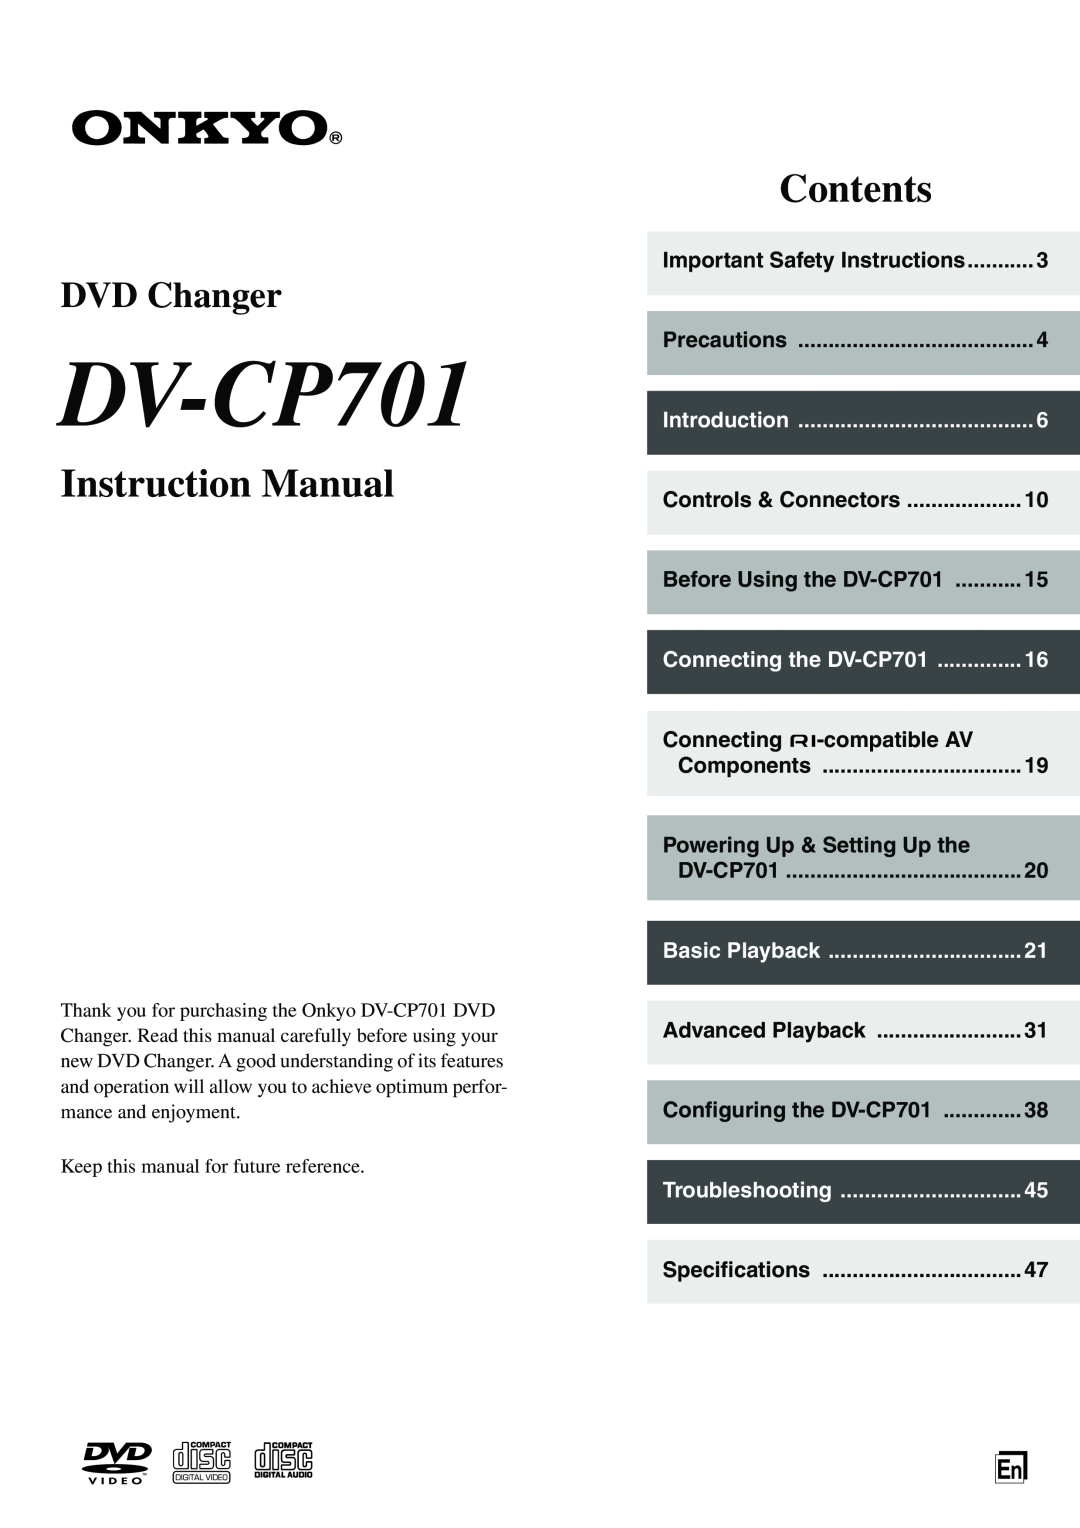 Onkyo instruction manual Introduction, Connecting the DV-CP701, Basic Playback, Troubleshooting, Instruction Manual 